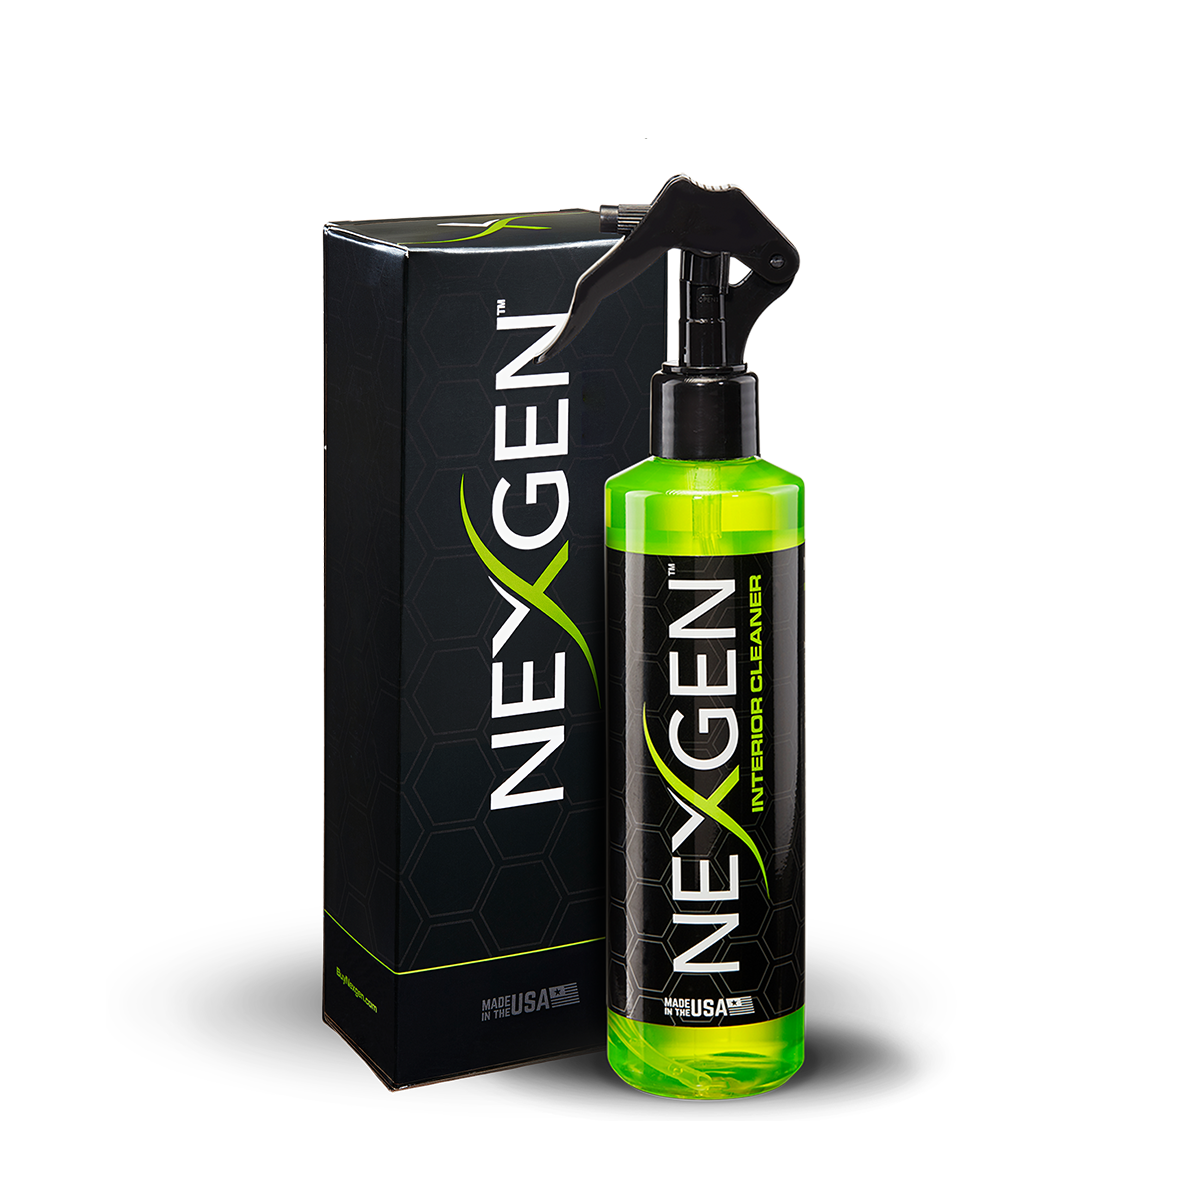 Nexgen Car Interior Cleaner | Cleans & Protects All Surfaces 8 oz